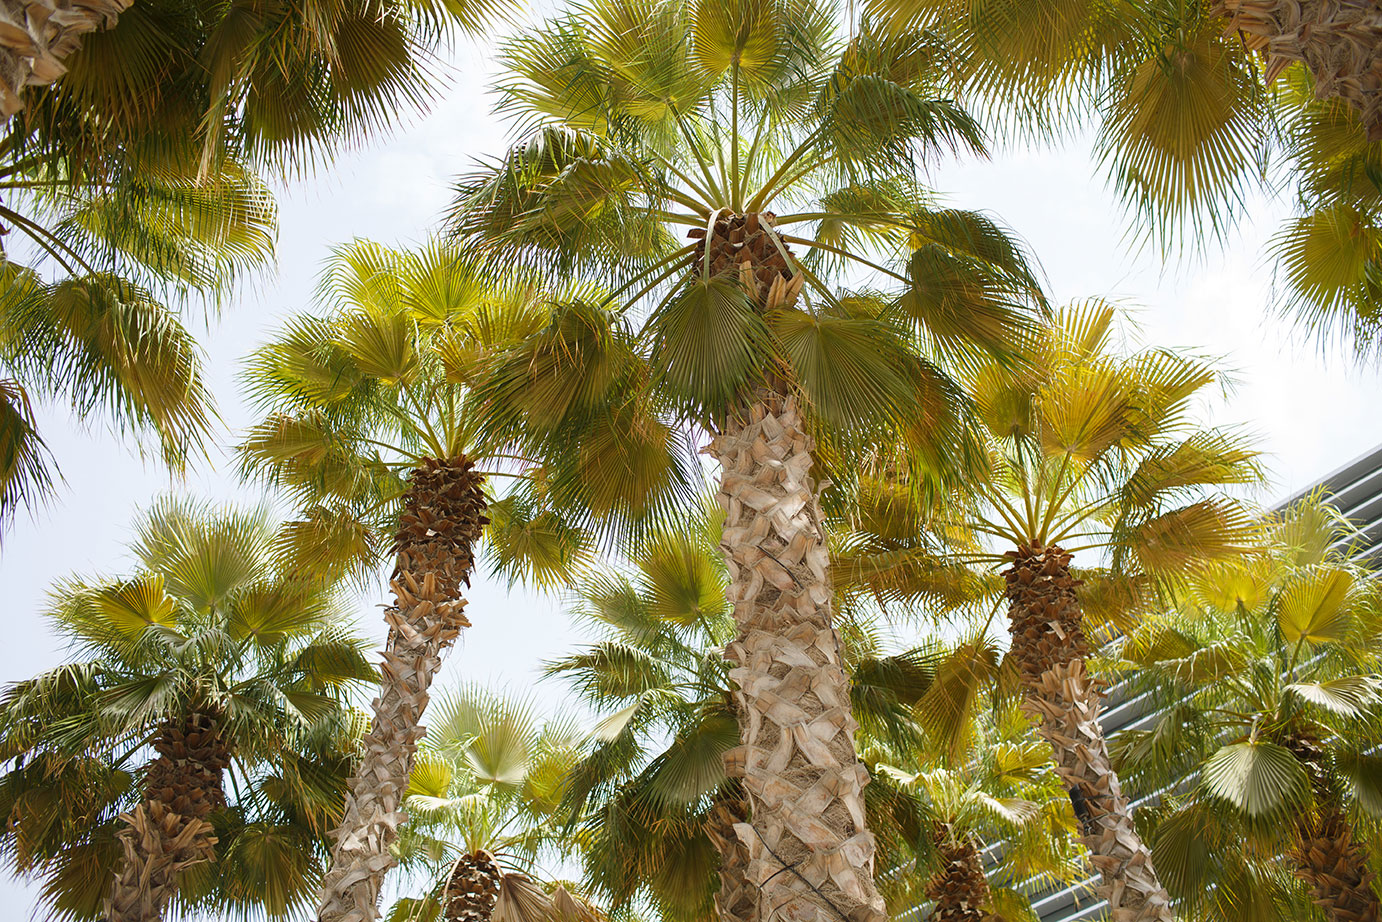 Researchers Uncover New Insights on Date Palm Evolution Using 2,100-year Old Leaf